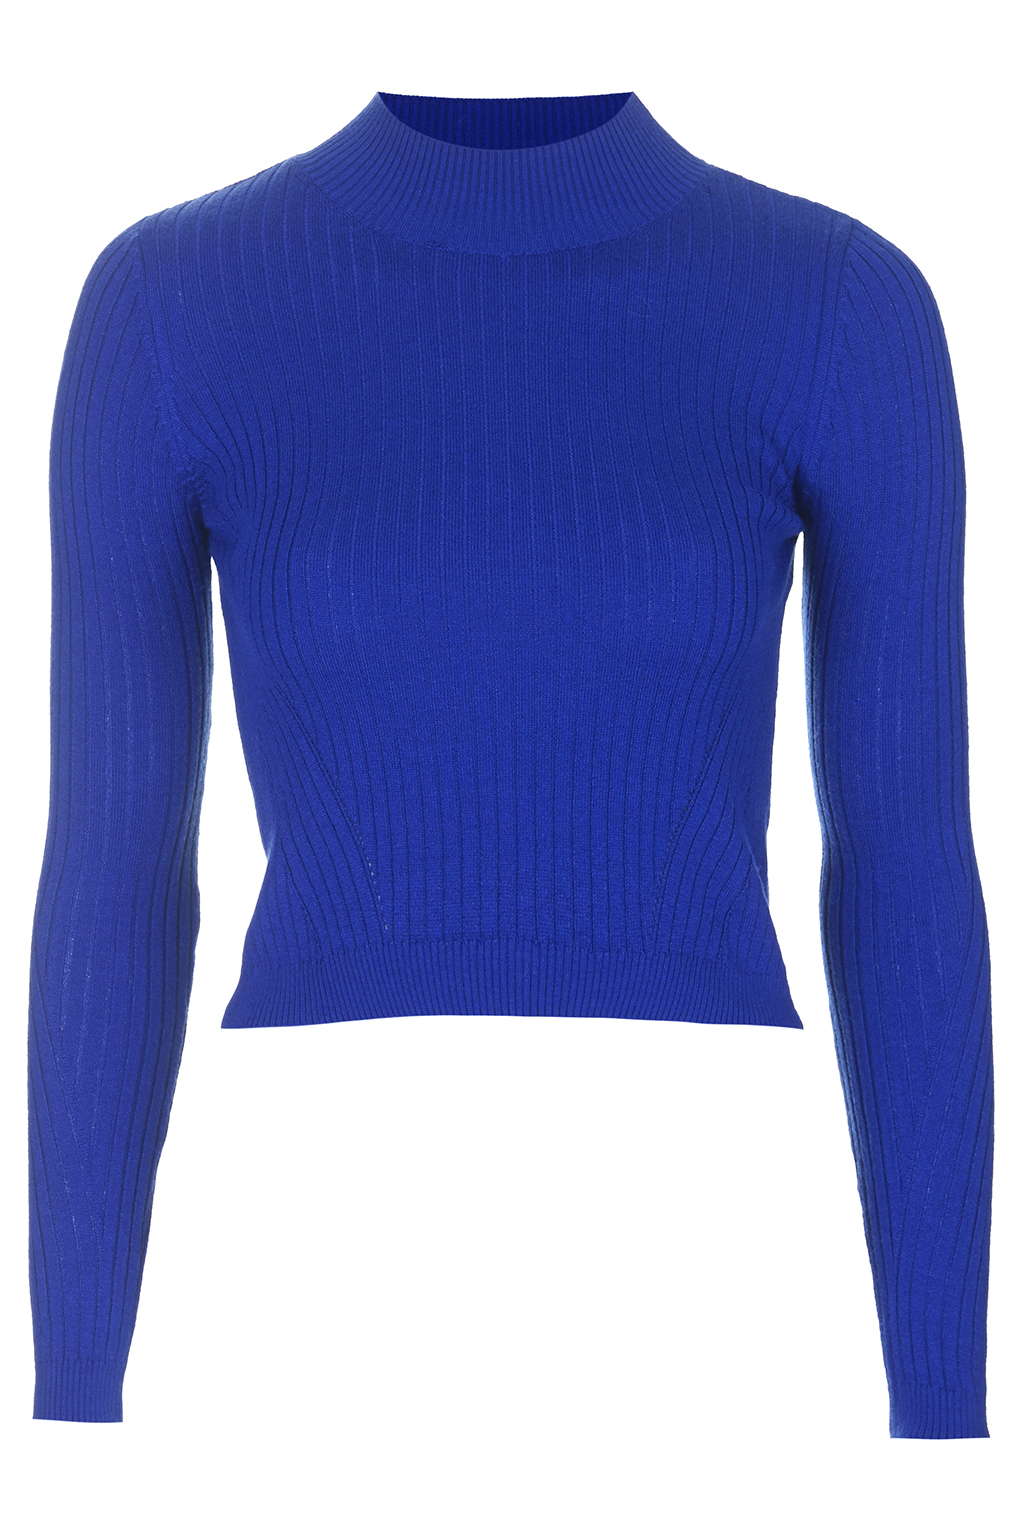 2 Best cropped long sleeve knit sweaters for about $50 as of 2023 - Slant